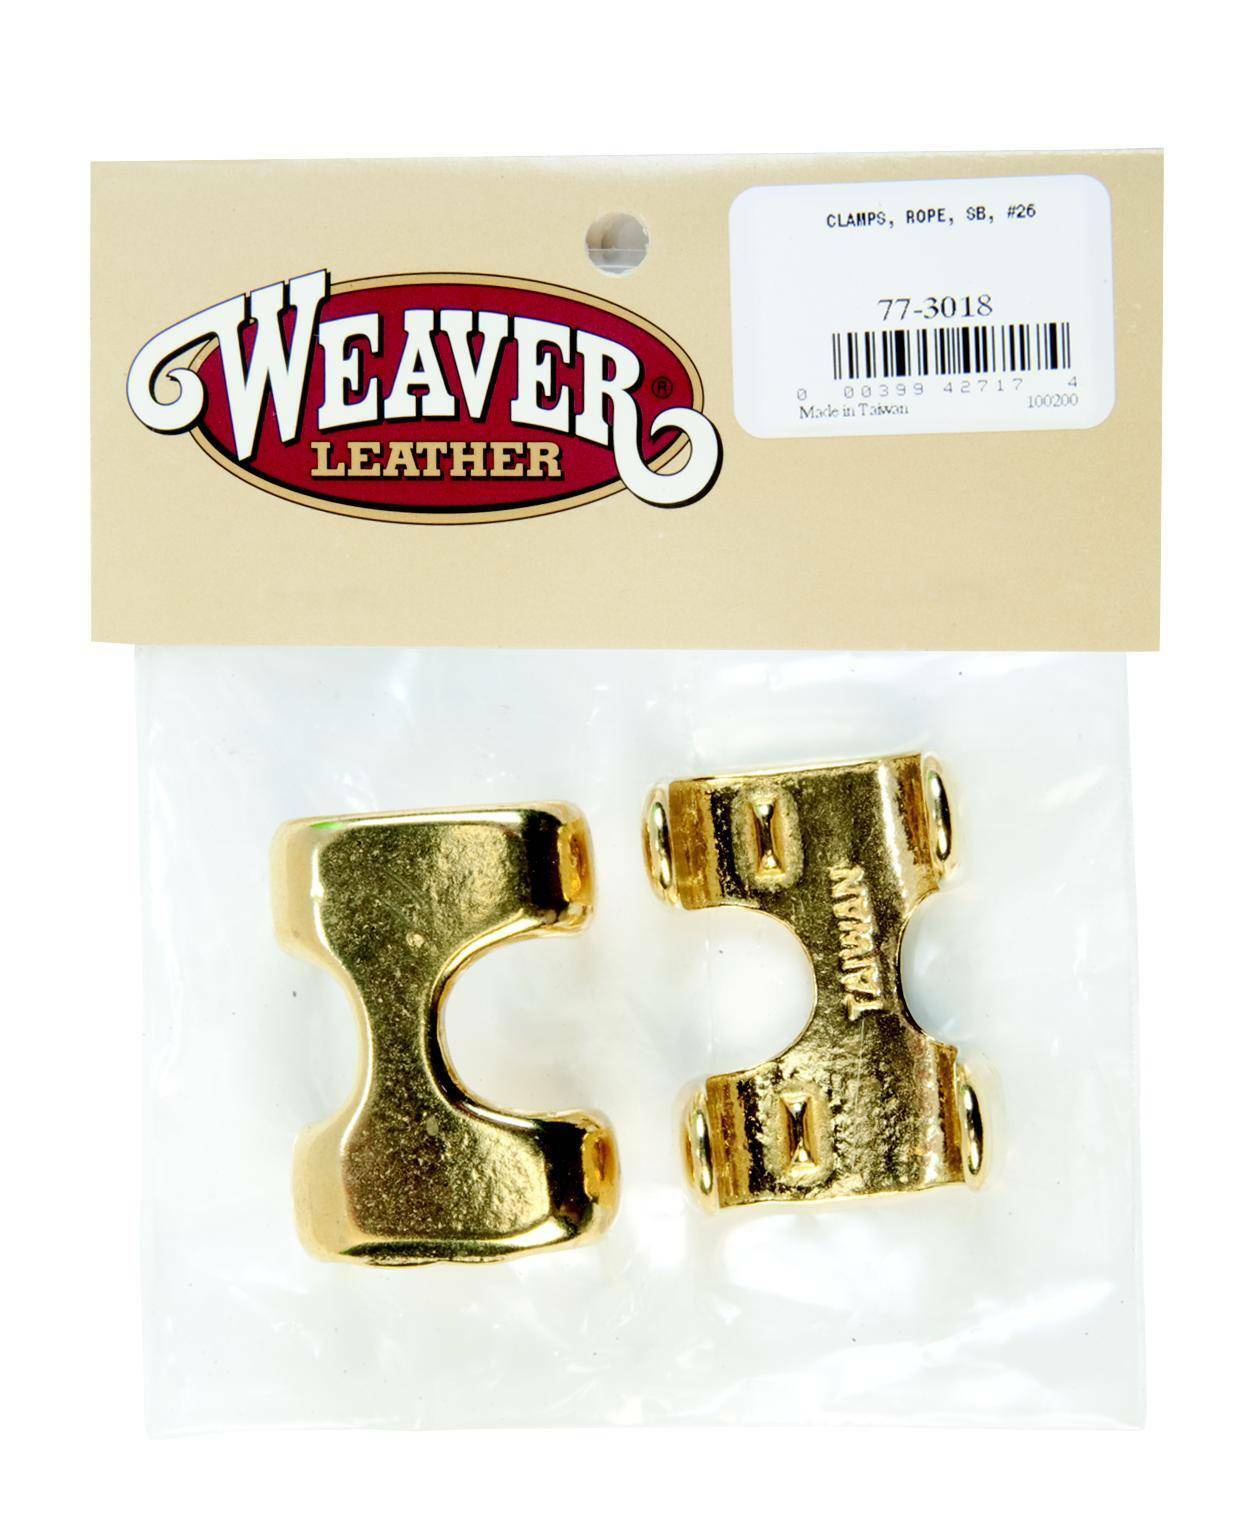 Weaver Leather Bagged 26 Rope Clamps 2 Pack